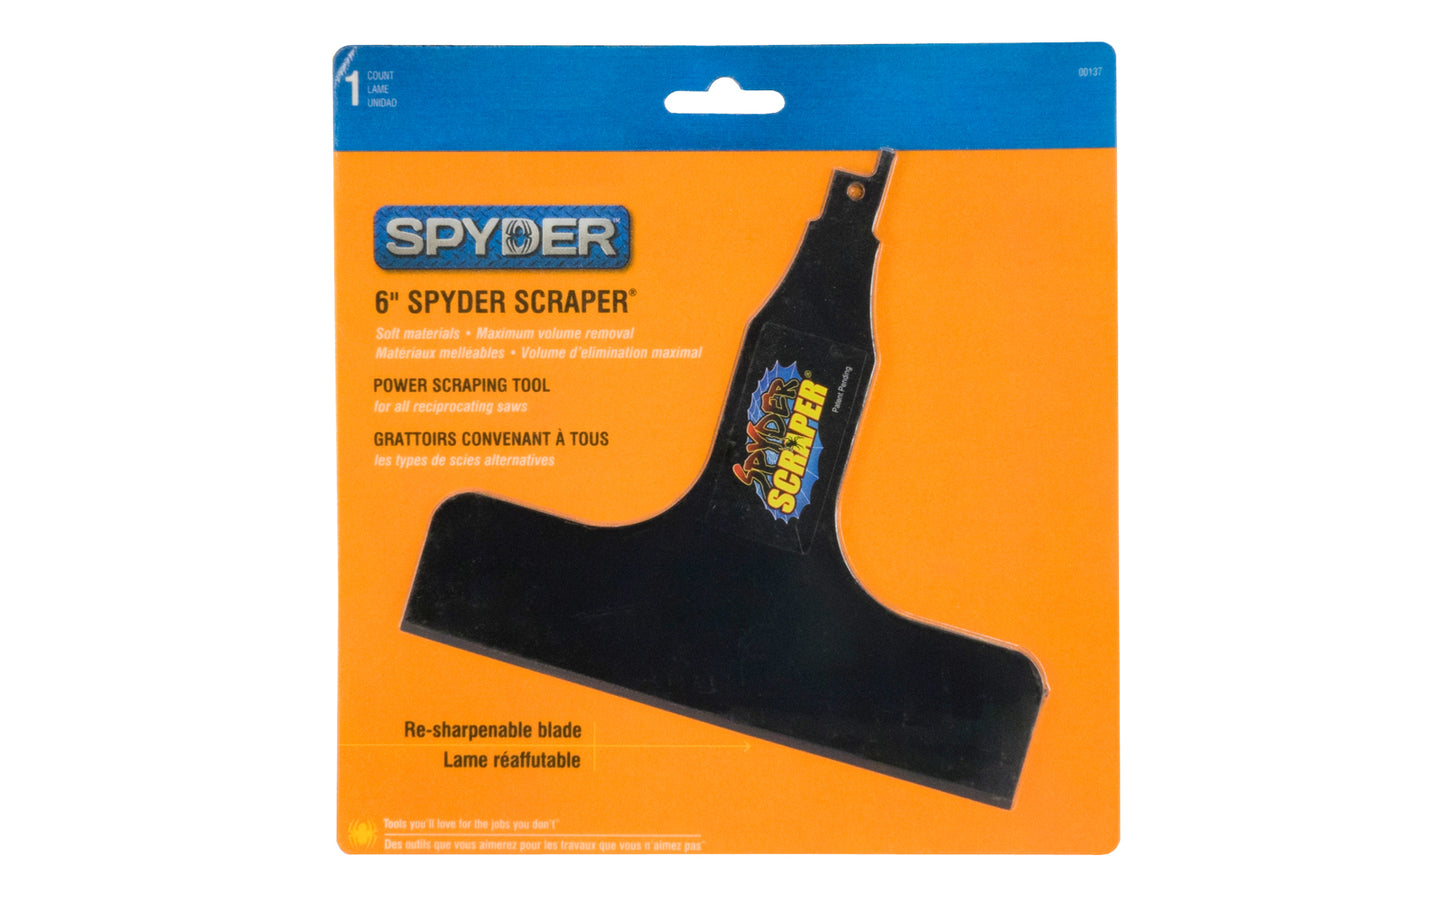 This 6" Spyder Scraper is a power scraping tool for reciprocating saws. Designed for soft materials. Model 0000137. 6" long blade. 884835000059